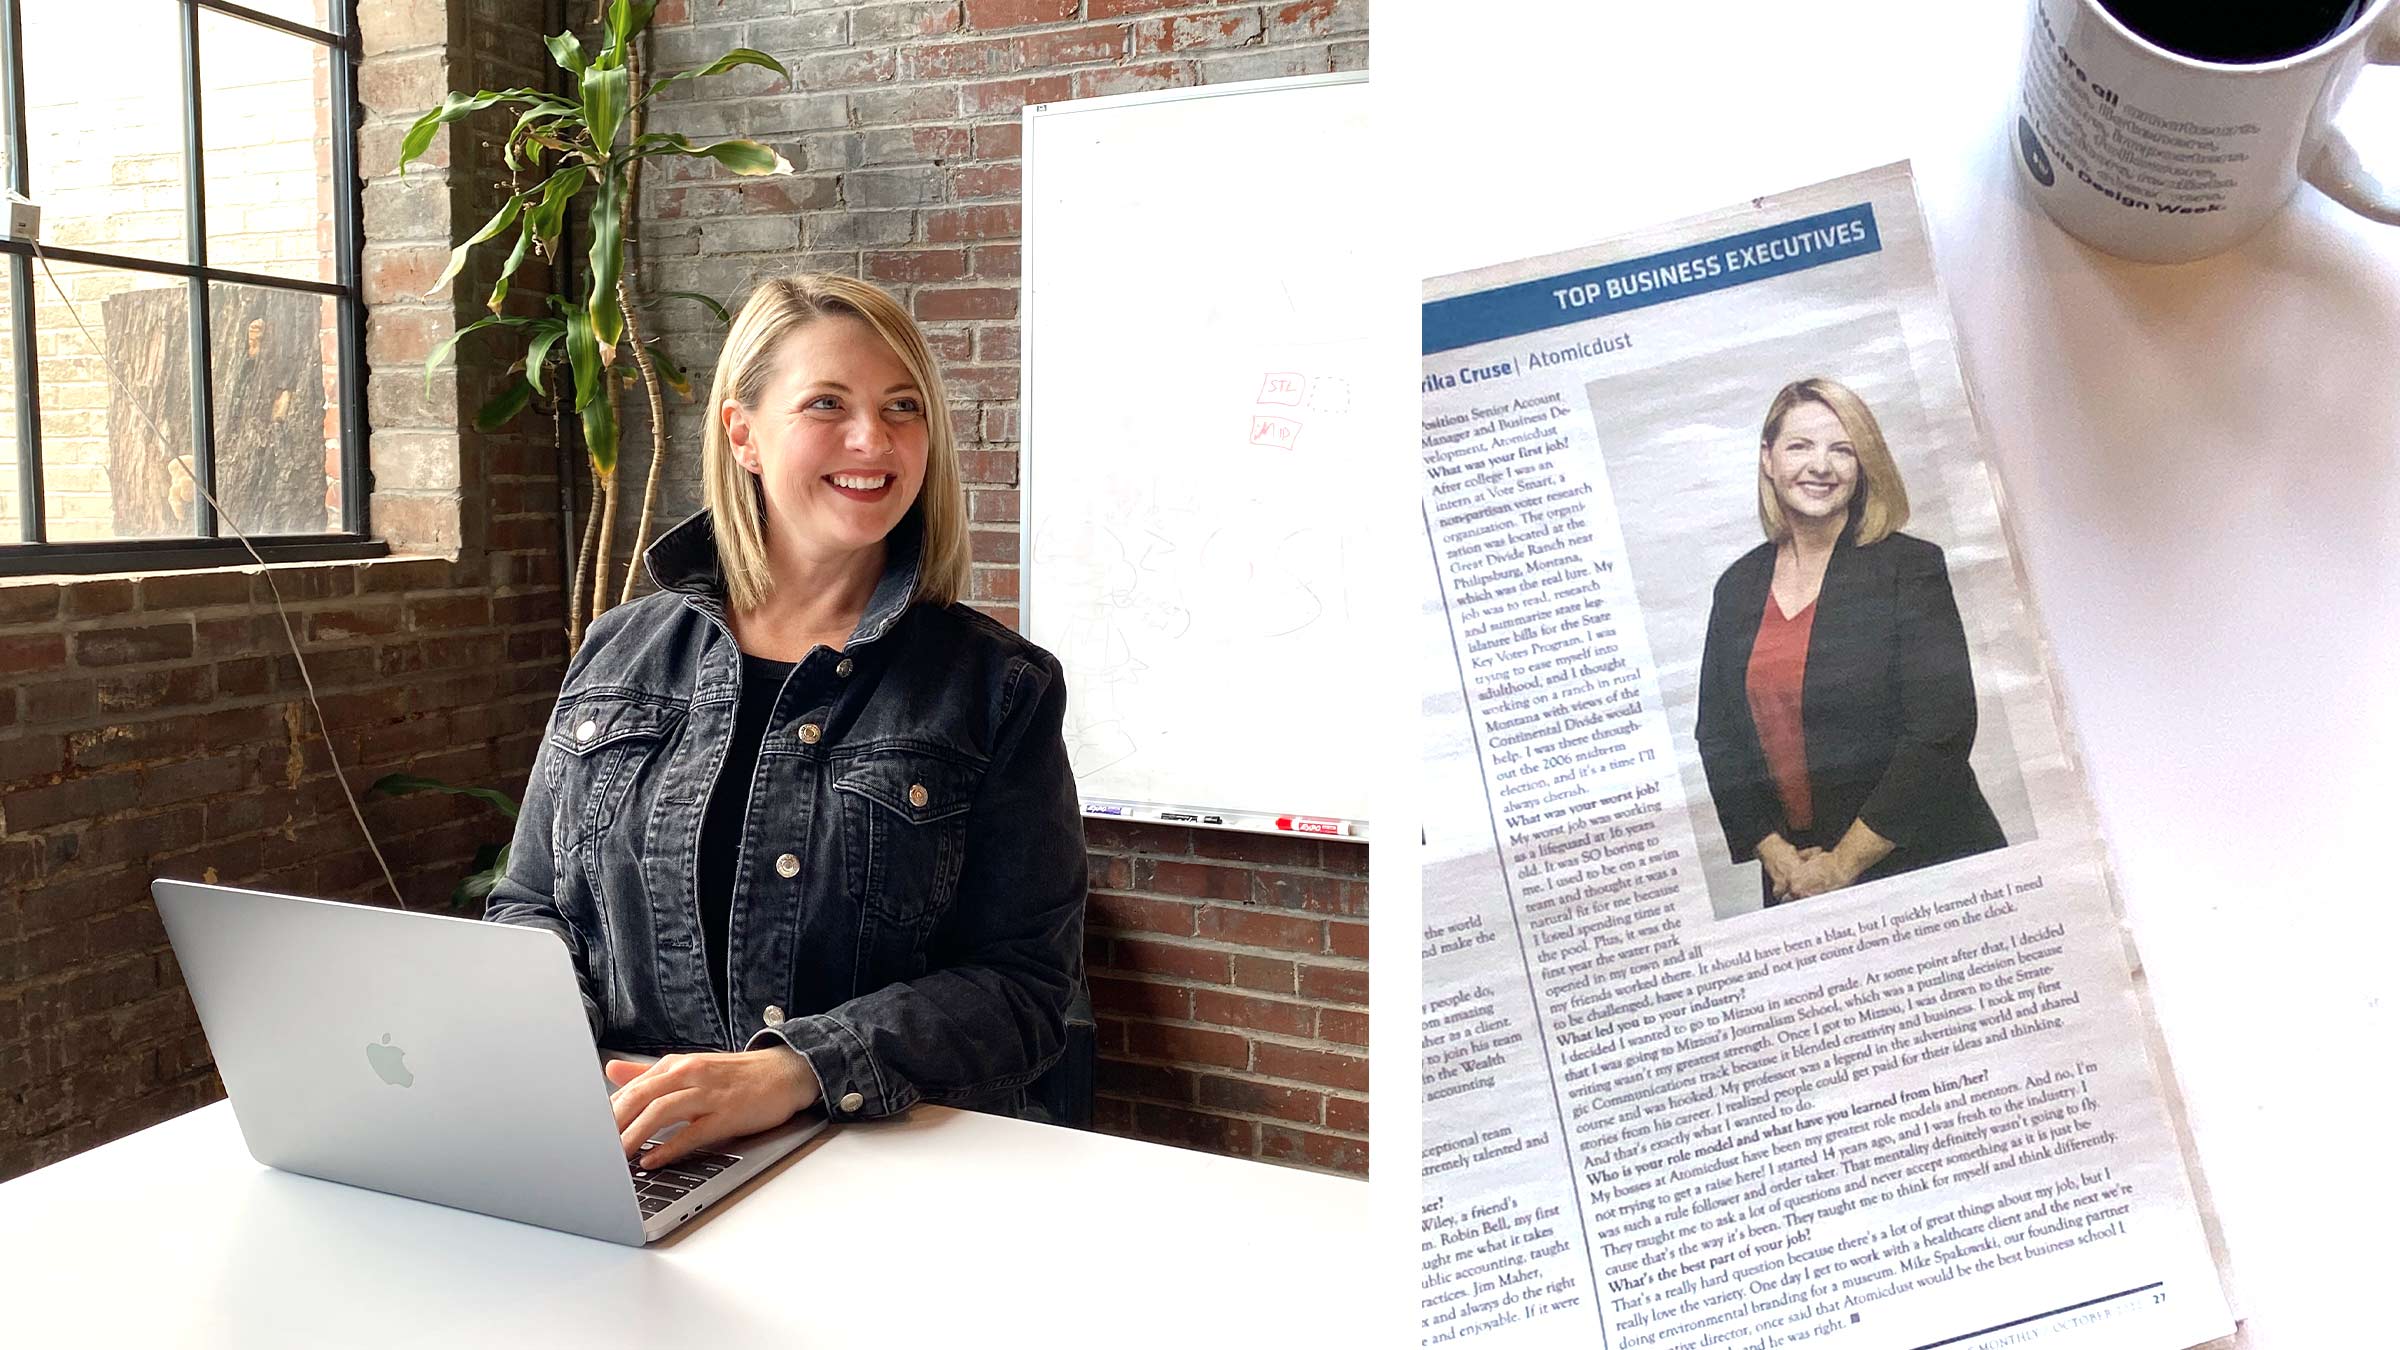 Erika Cruse works at the Atomicdust office next to a copy of the Small Business Monthly article spotlighting her accomplishments